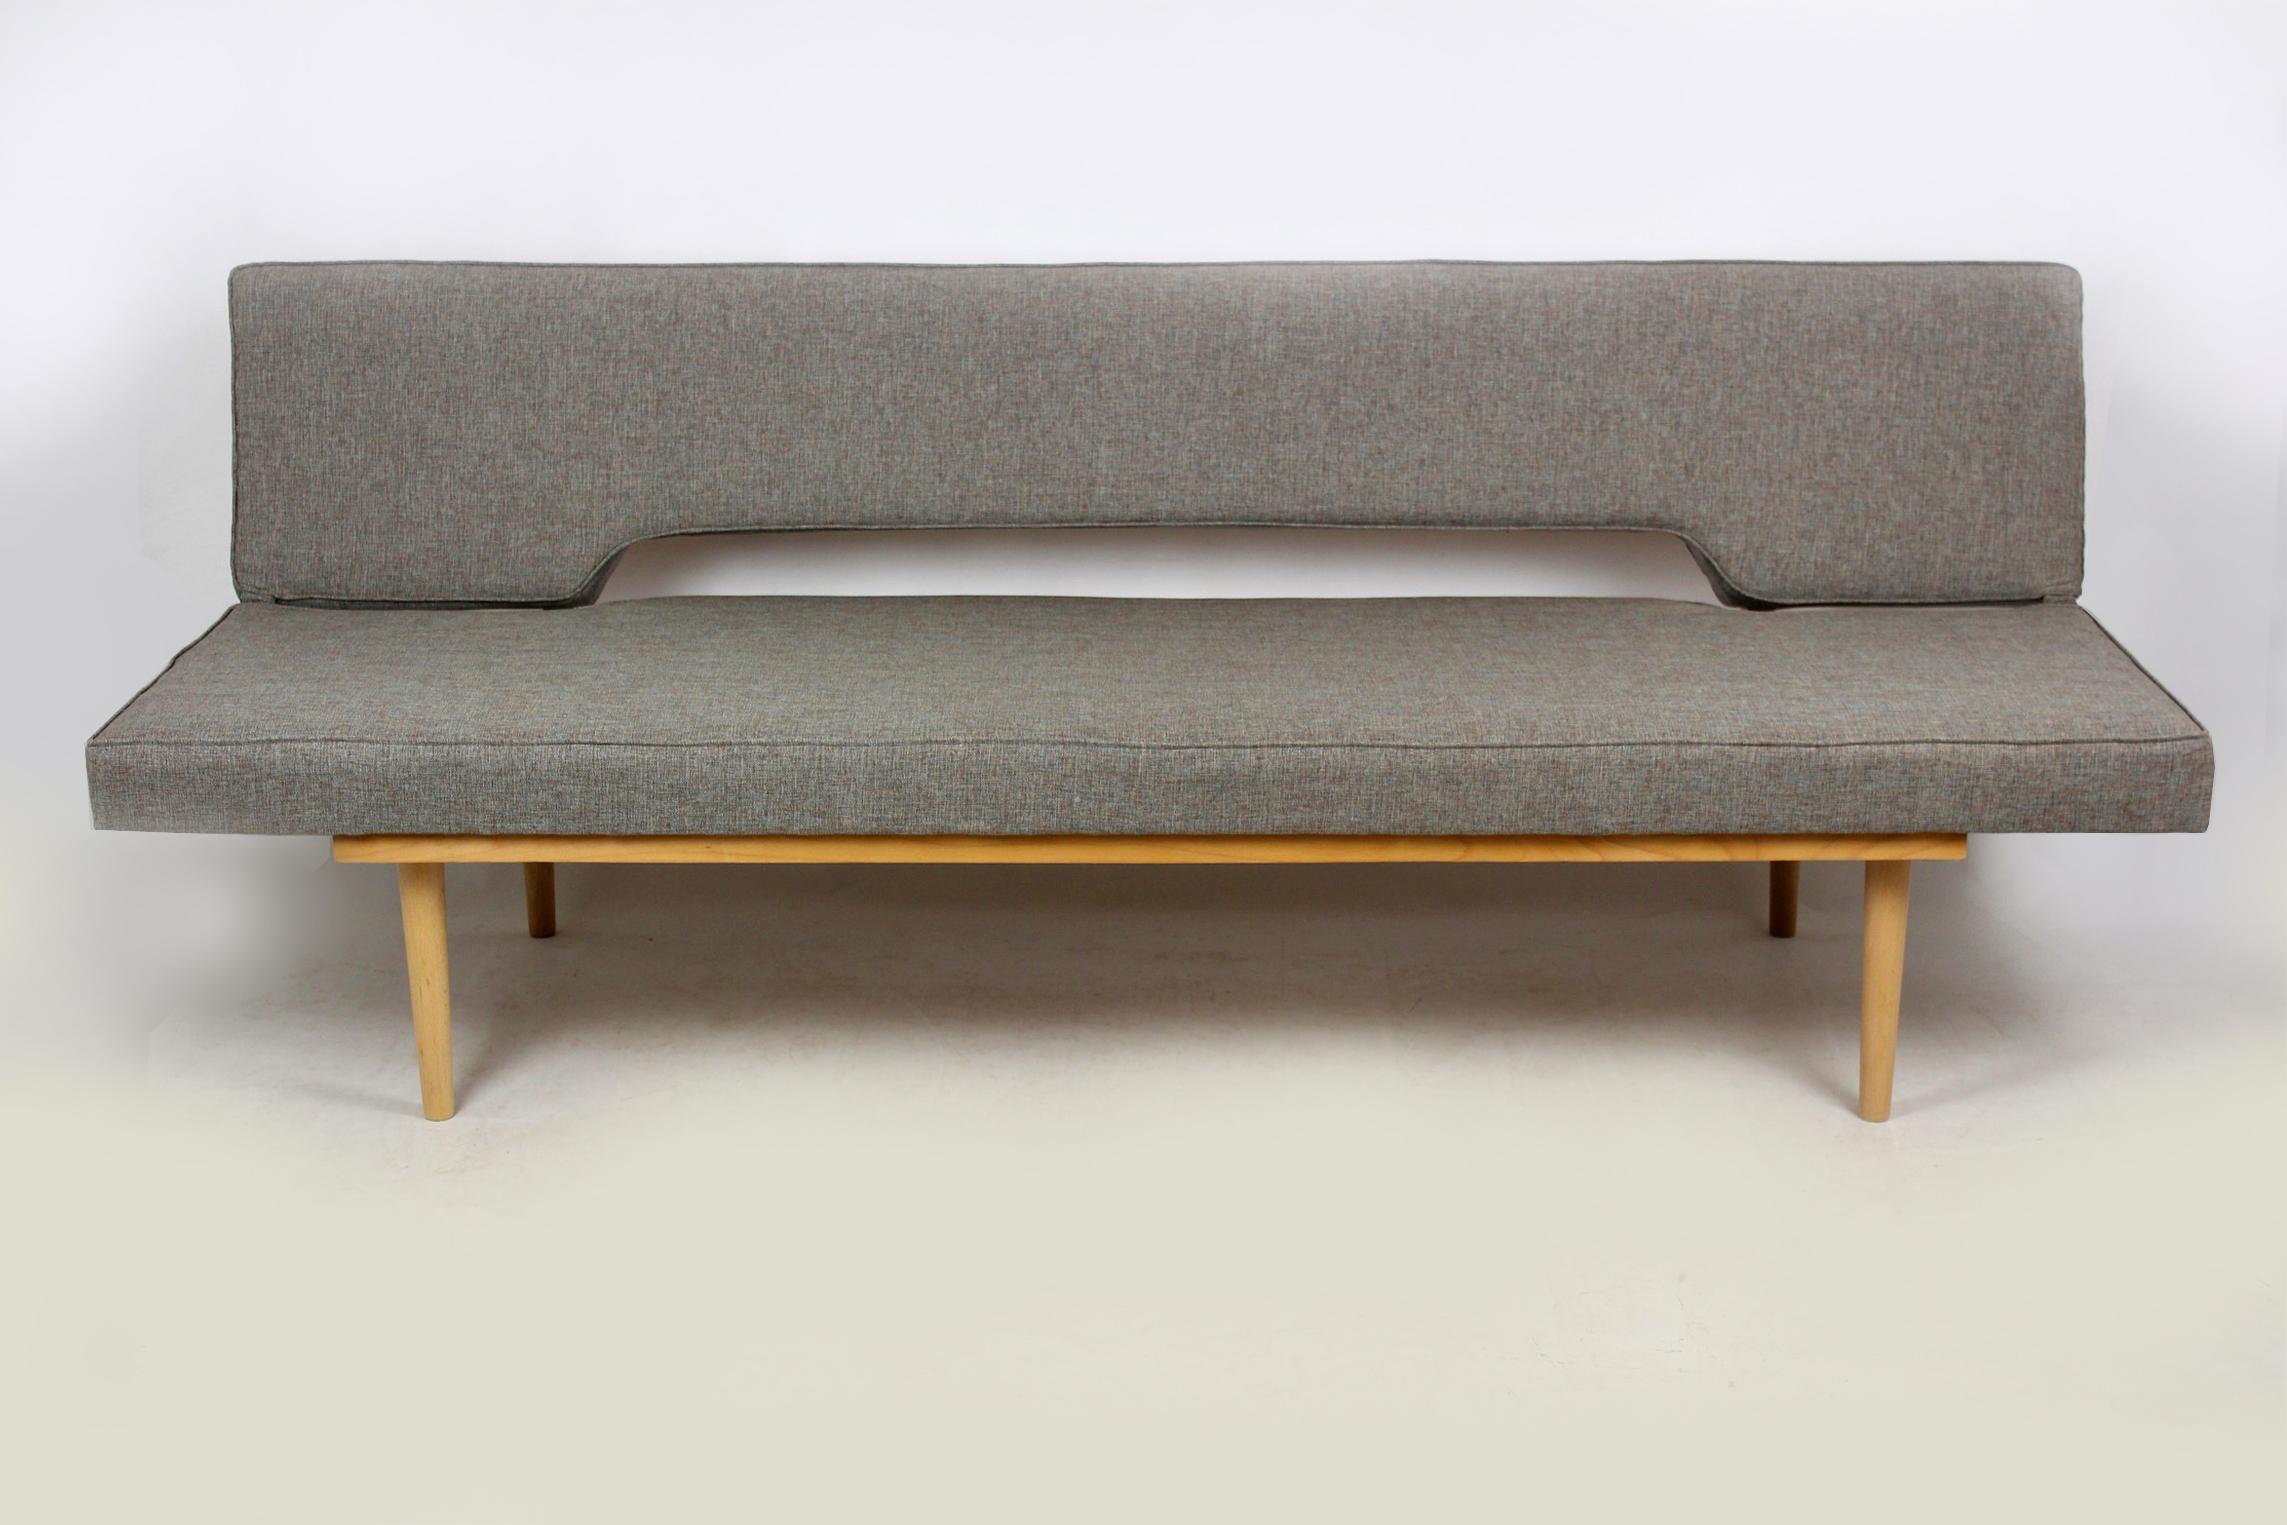 Midcentury sofa in a simple, minimalistic form, designed by Miroslav Navratil in the 1960s-1970s. The couch simply converts into a daybed (195 x 85cm). Completely restored – woodwork has been refinished in satin, pillows have been upholstered with